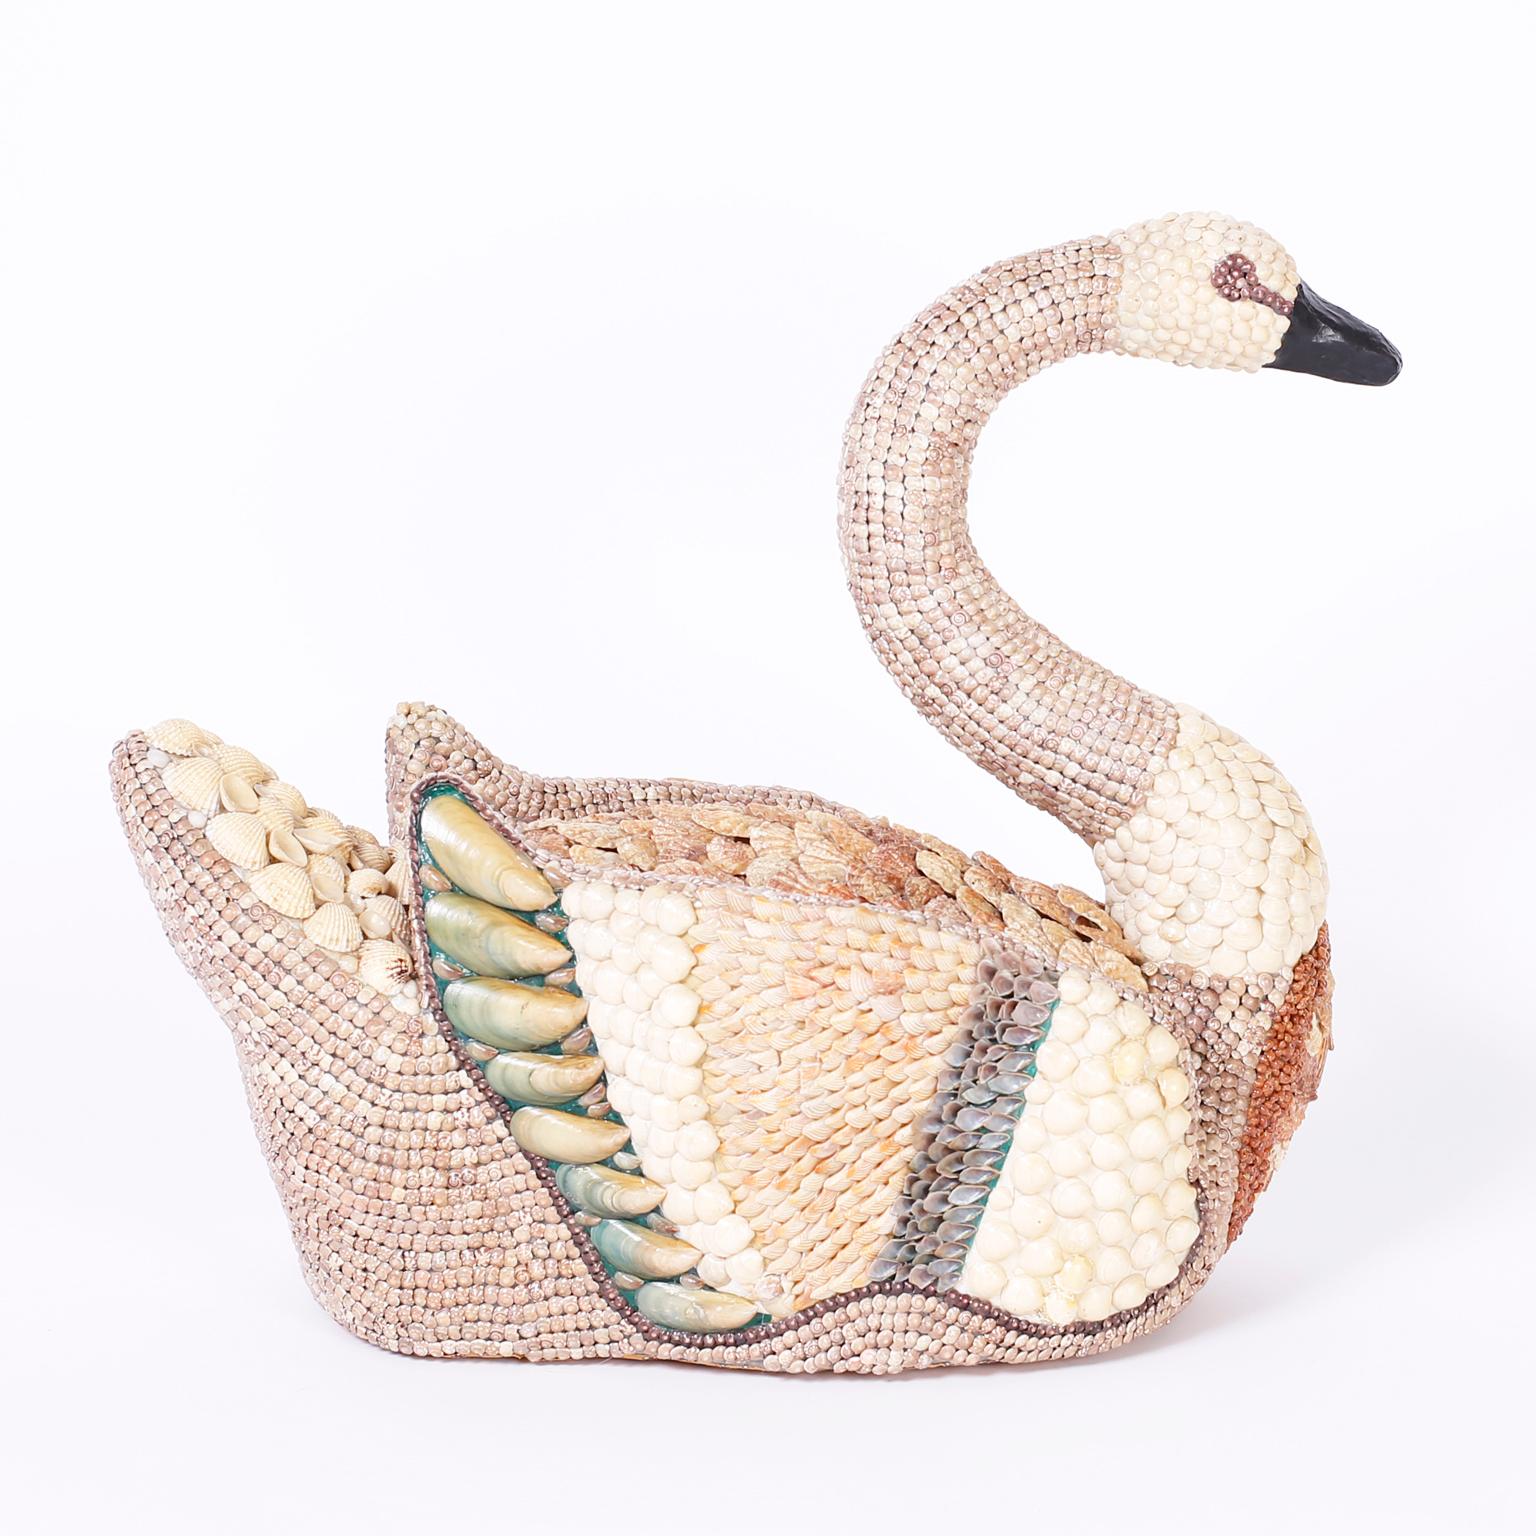 As if floating on a pond this lofty life-size swan is completely encrusted with exotic sea shells over a composition form.